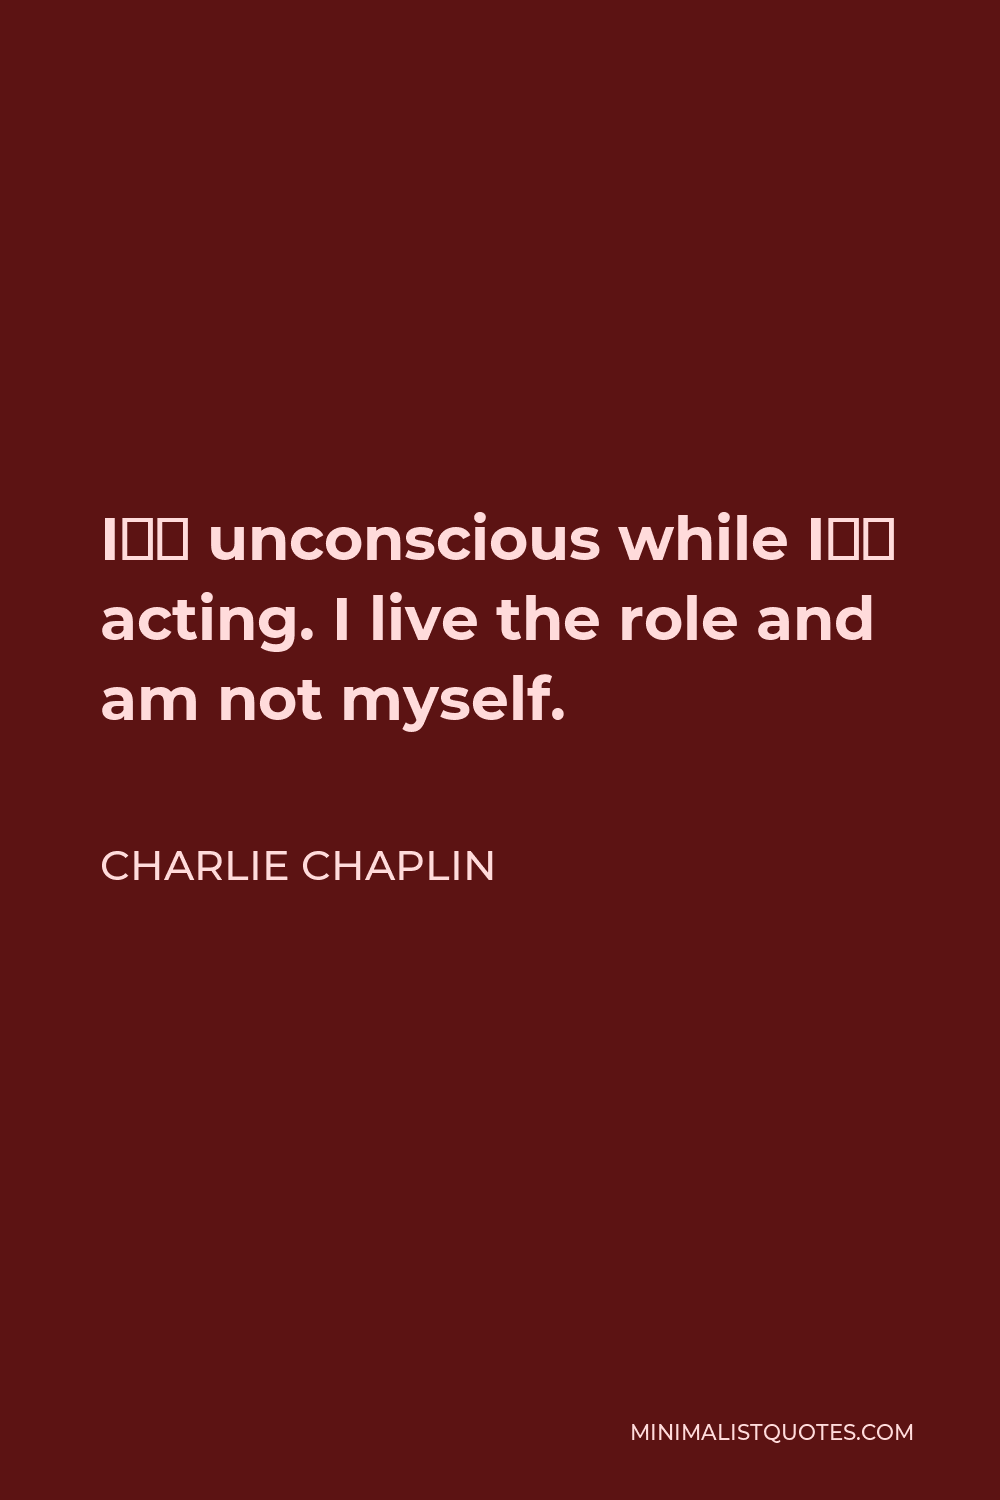 Charlie Chaplin Quote - I’m unconscious while I’m acting. I live the role and am not myself.